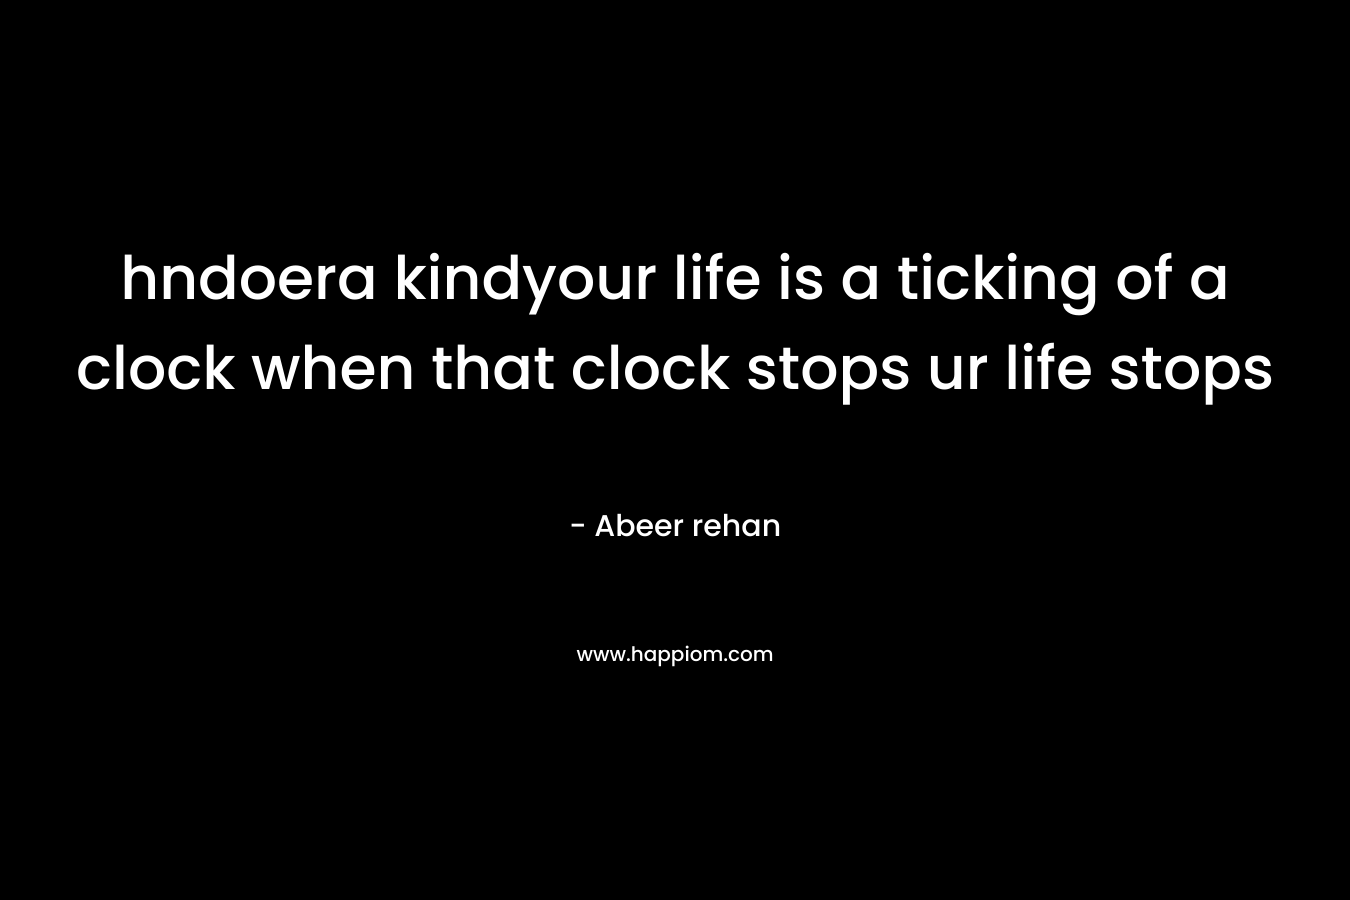 hndoera kindyour life is a ticking of a clock when that clock stops ur life stops